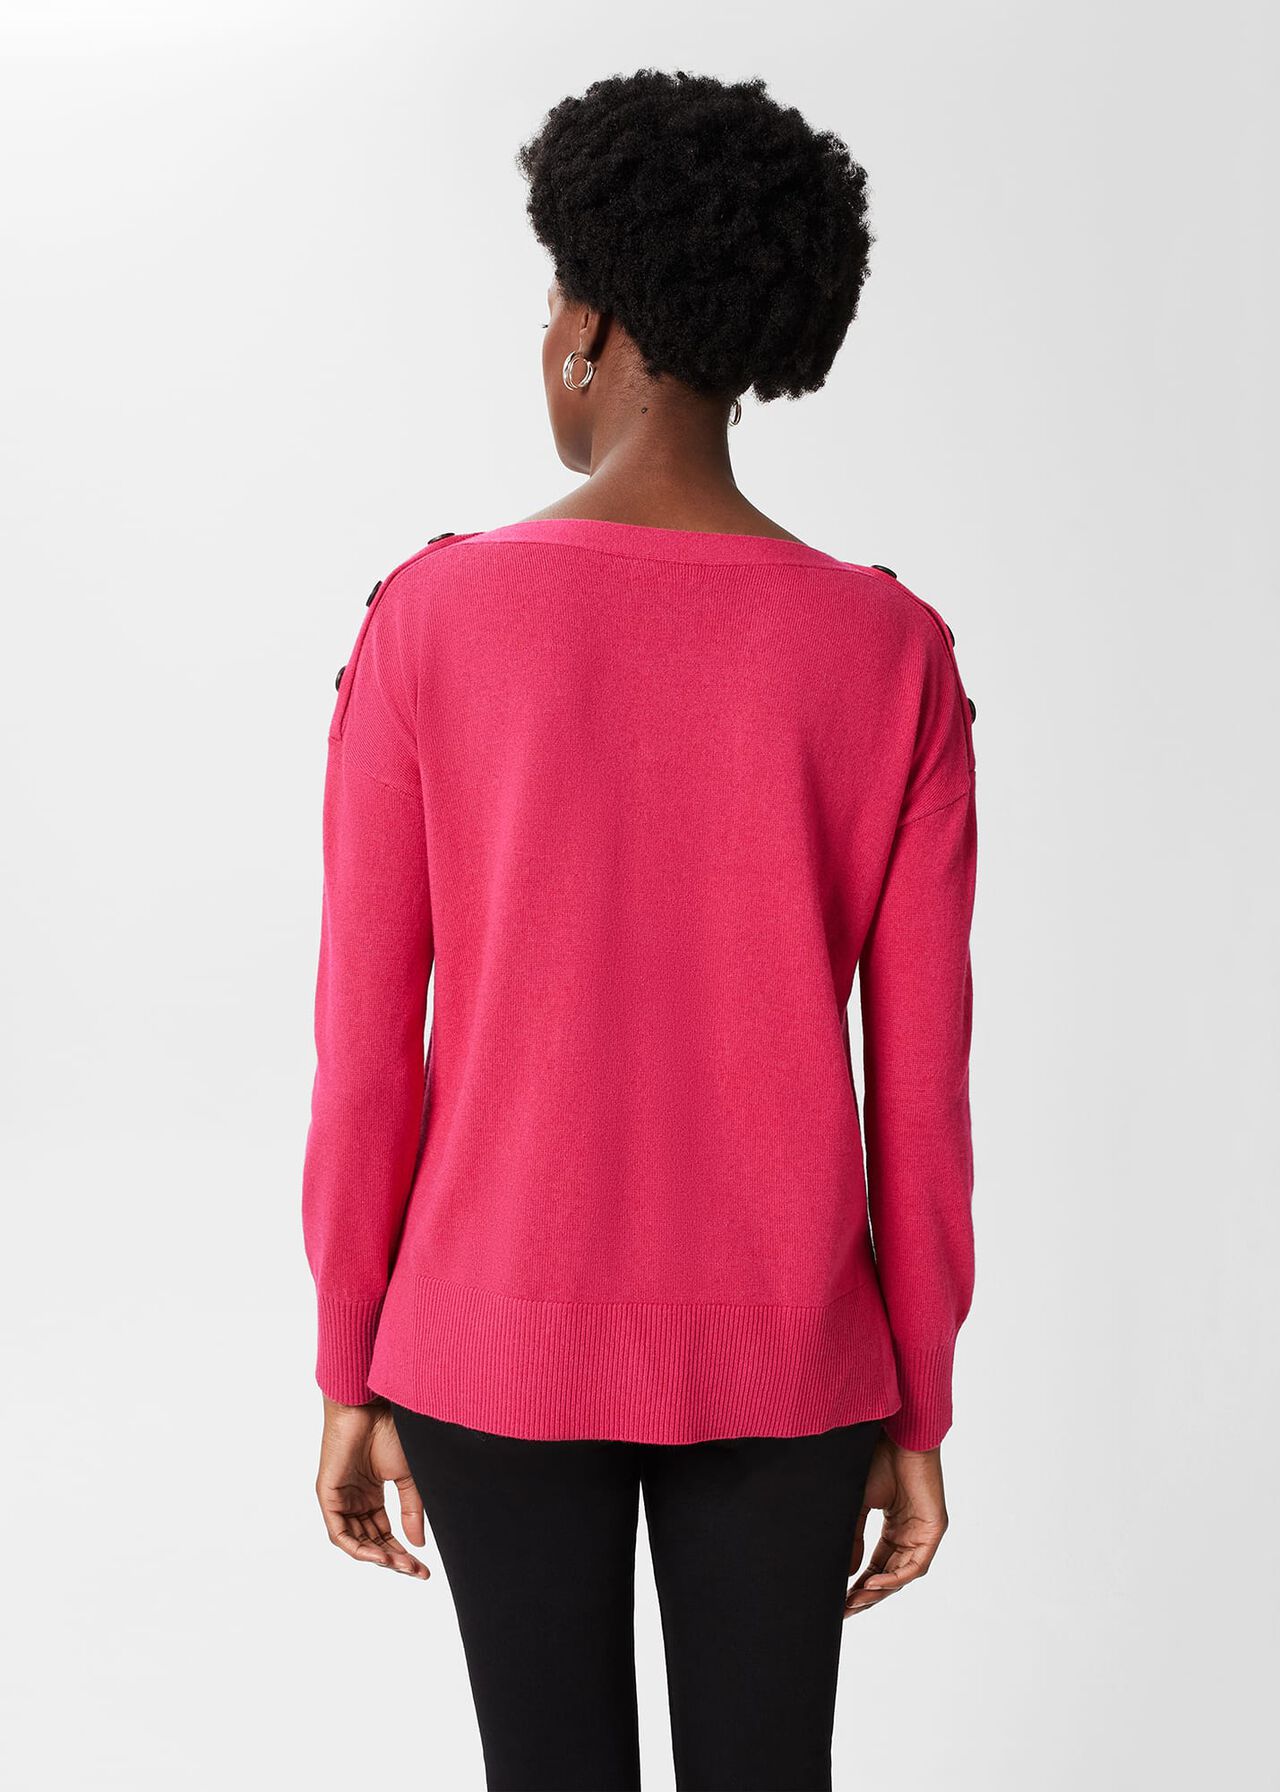 Kayley Jumper With Cashmere, Raspberry Pink, hi-res